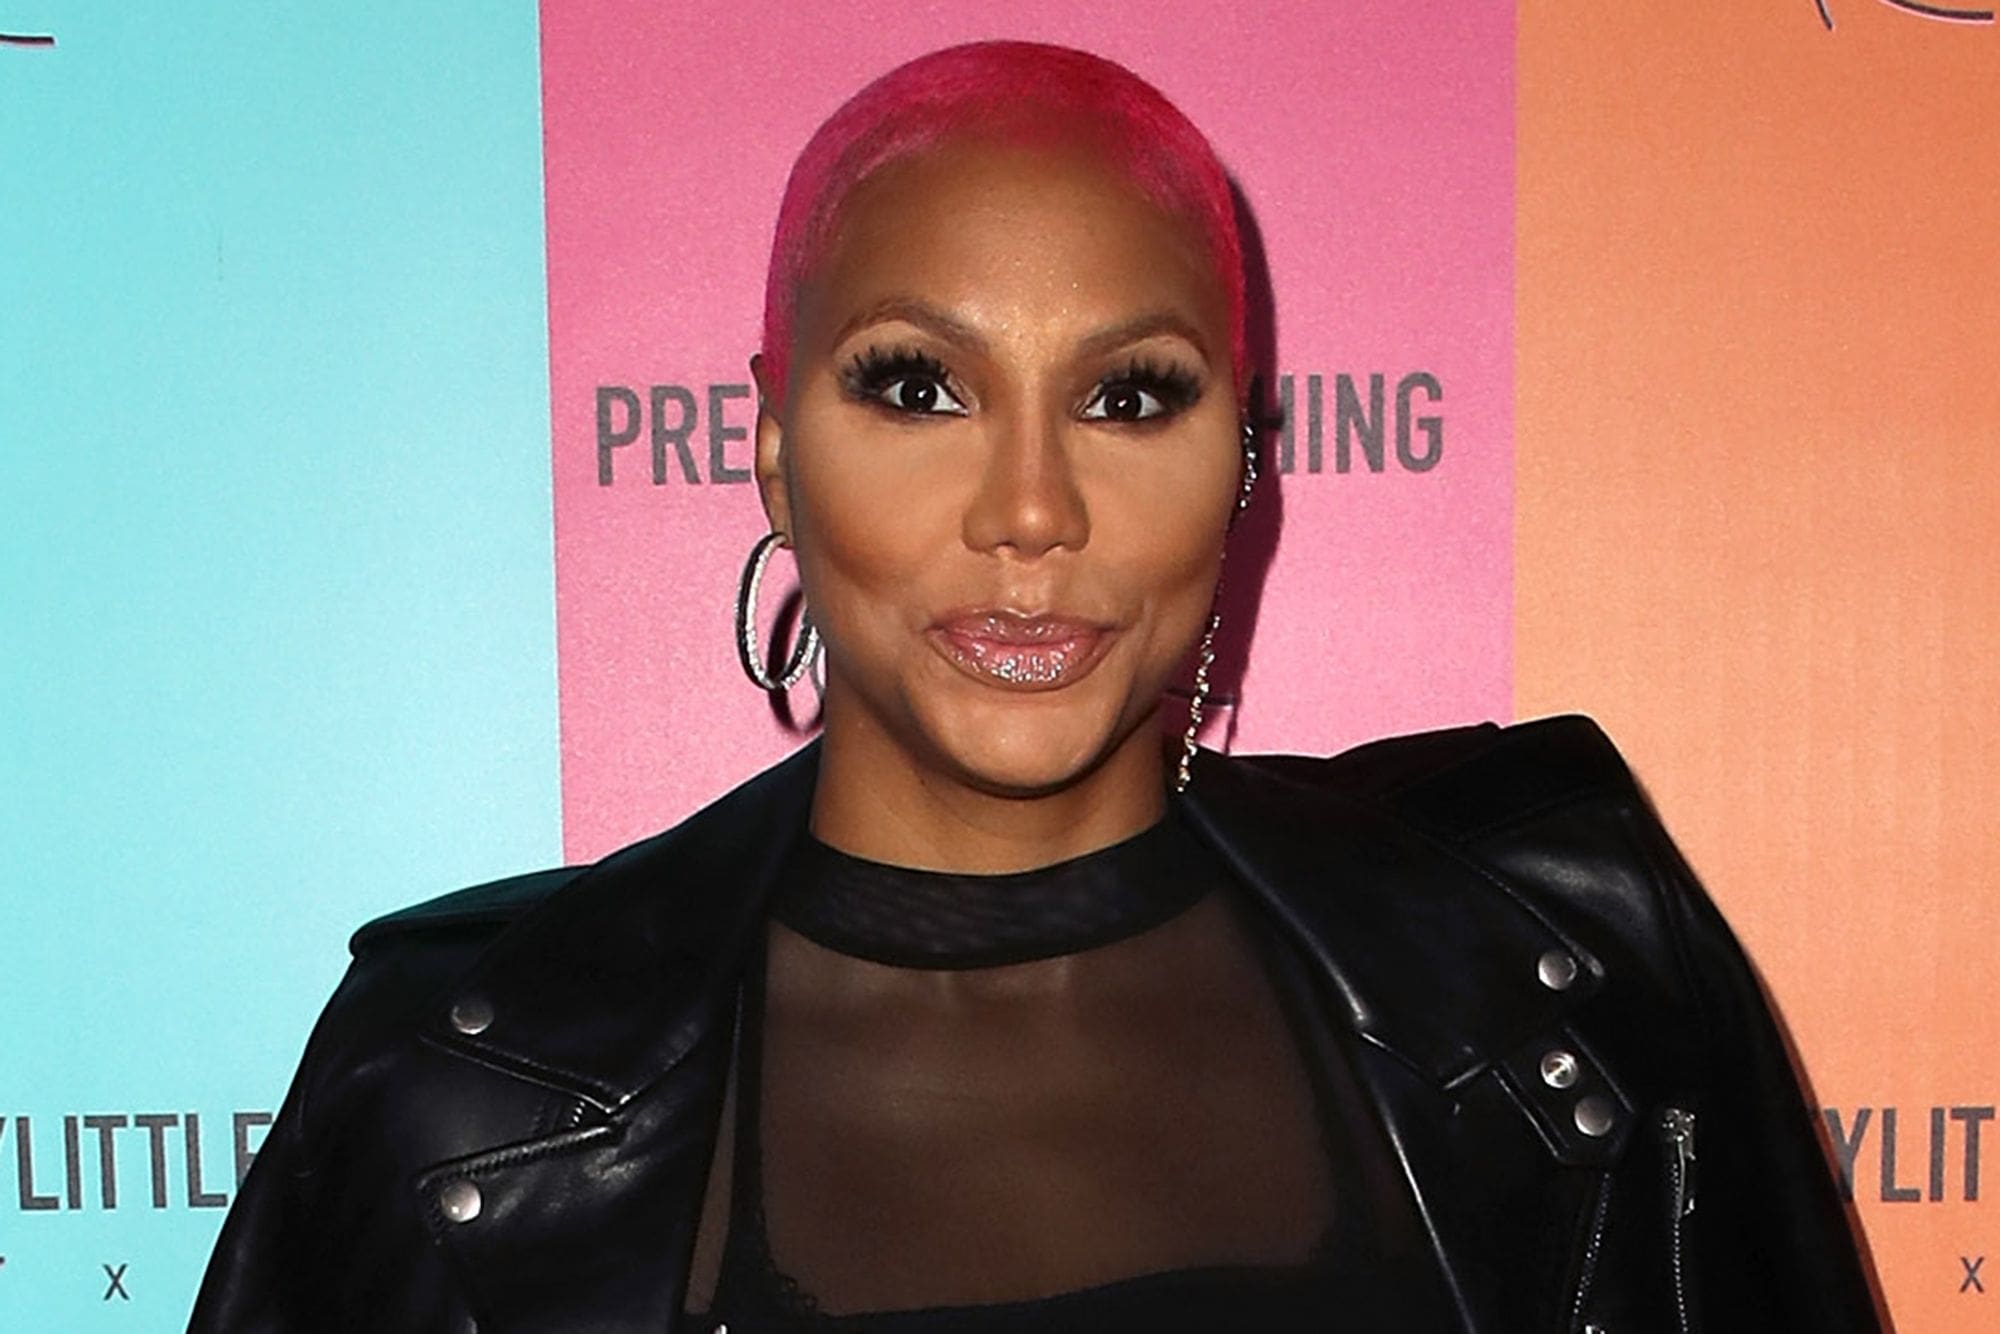 ”tamar-braxton-looks-gorgeous-in-her-latest-photo-see-it-here”